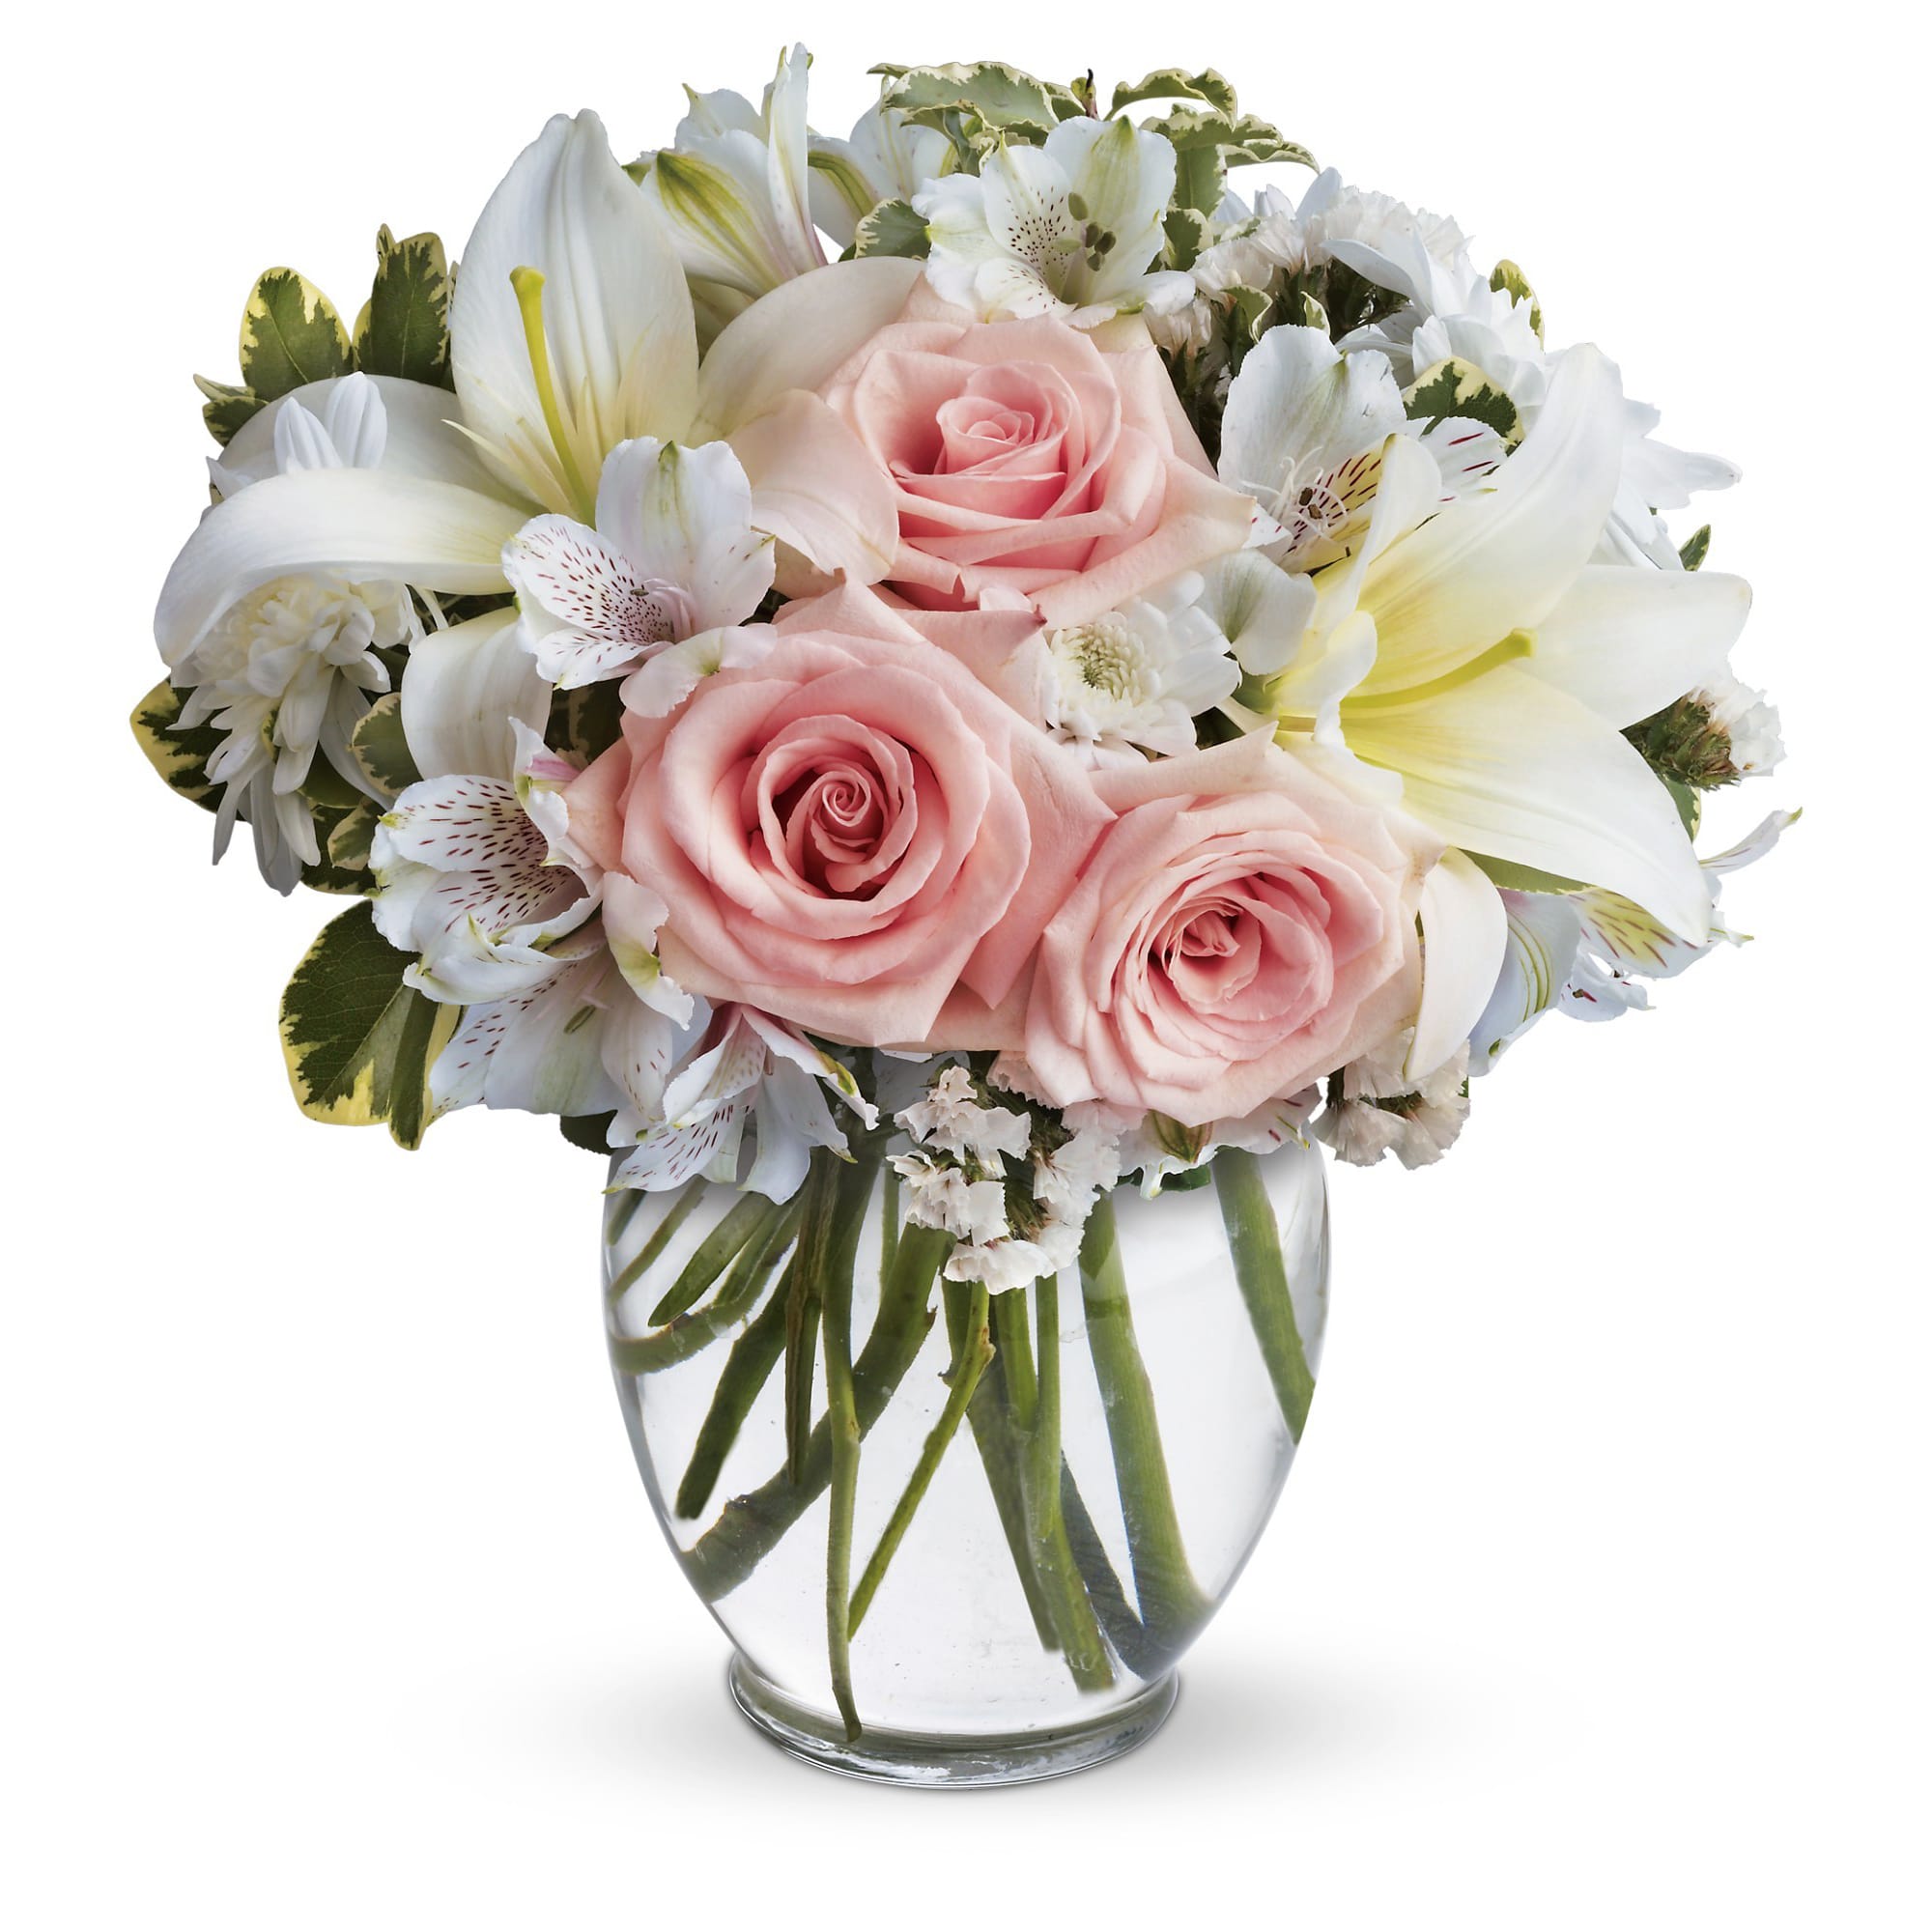 Arrive in Style - This beautiful bouquet will most certainly arrive in style! Ready for the runway, as it were. A delightful combination of light colors and lovely flowers, it's simply beautiful. 